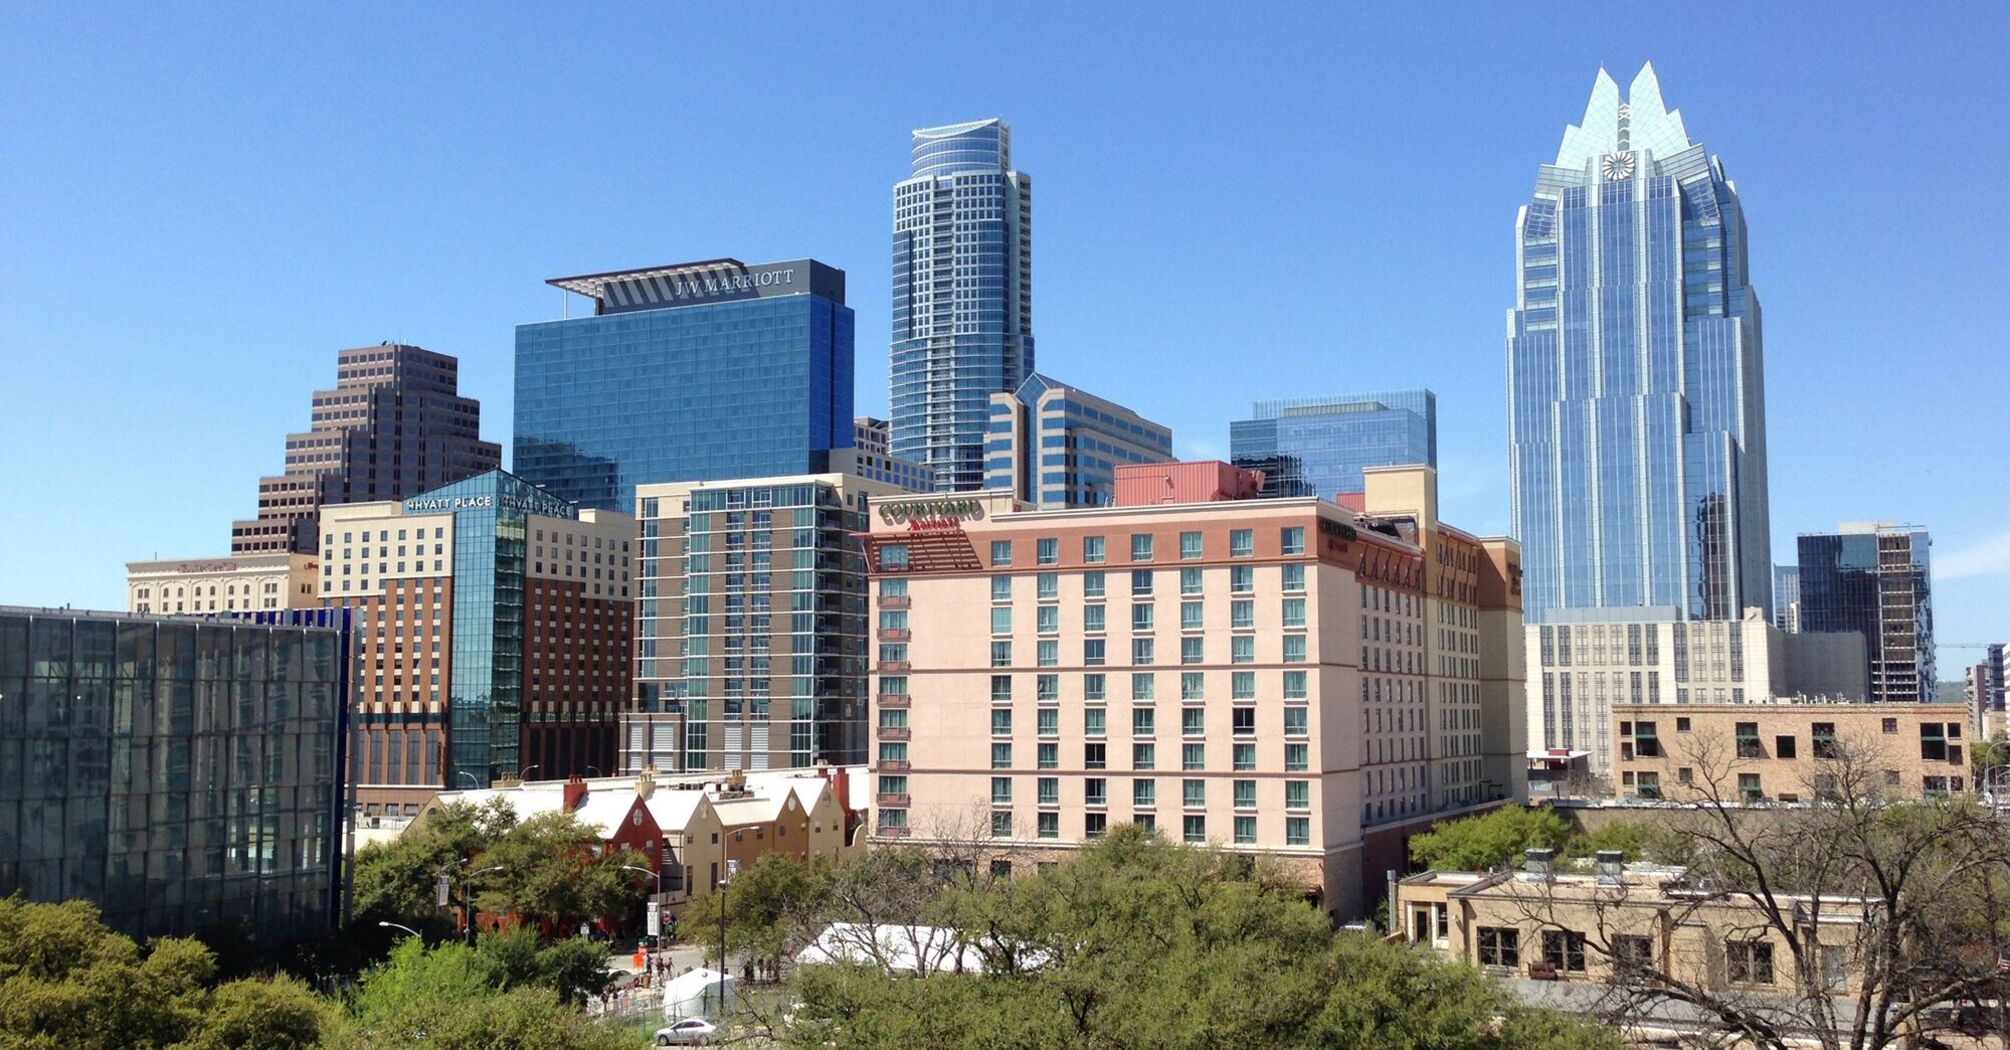 A view of downtown Austin, Texas, showcasing a mix of modern high-rise buildings and traditional architecture under a clear blue sky